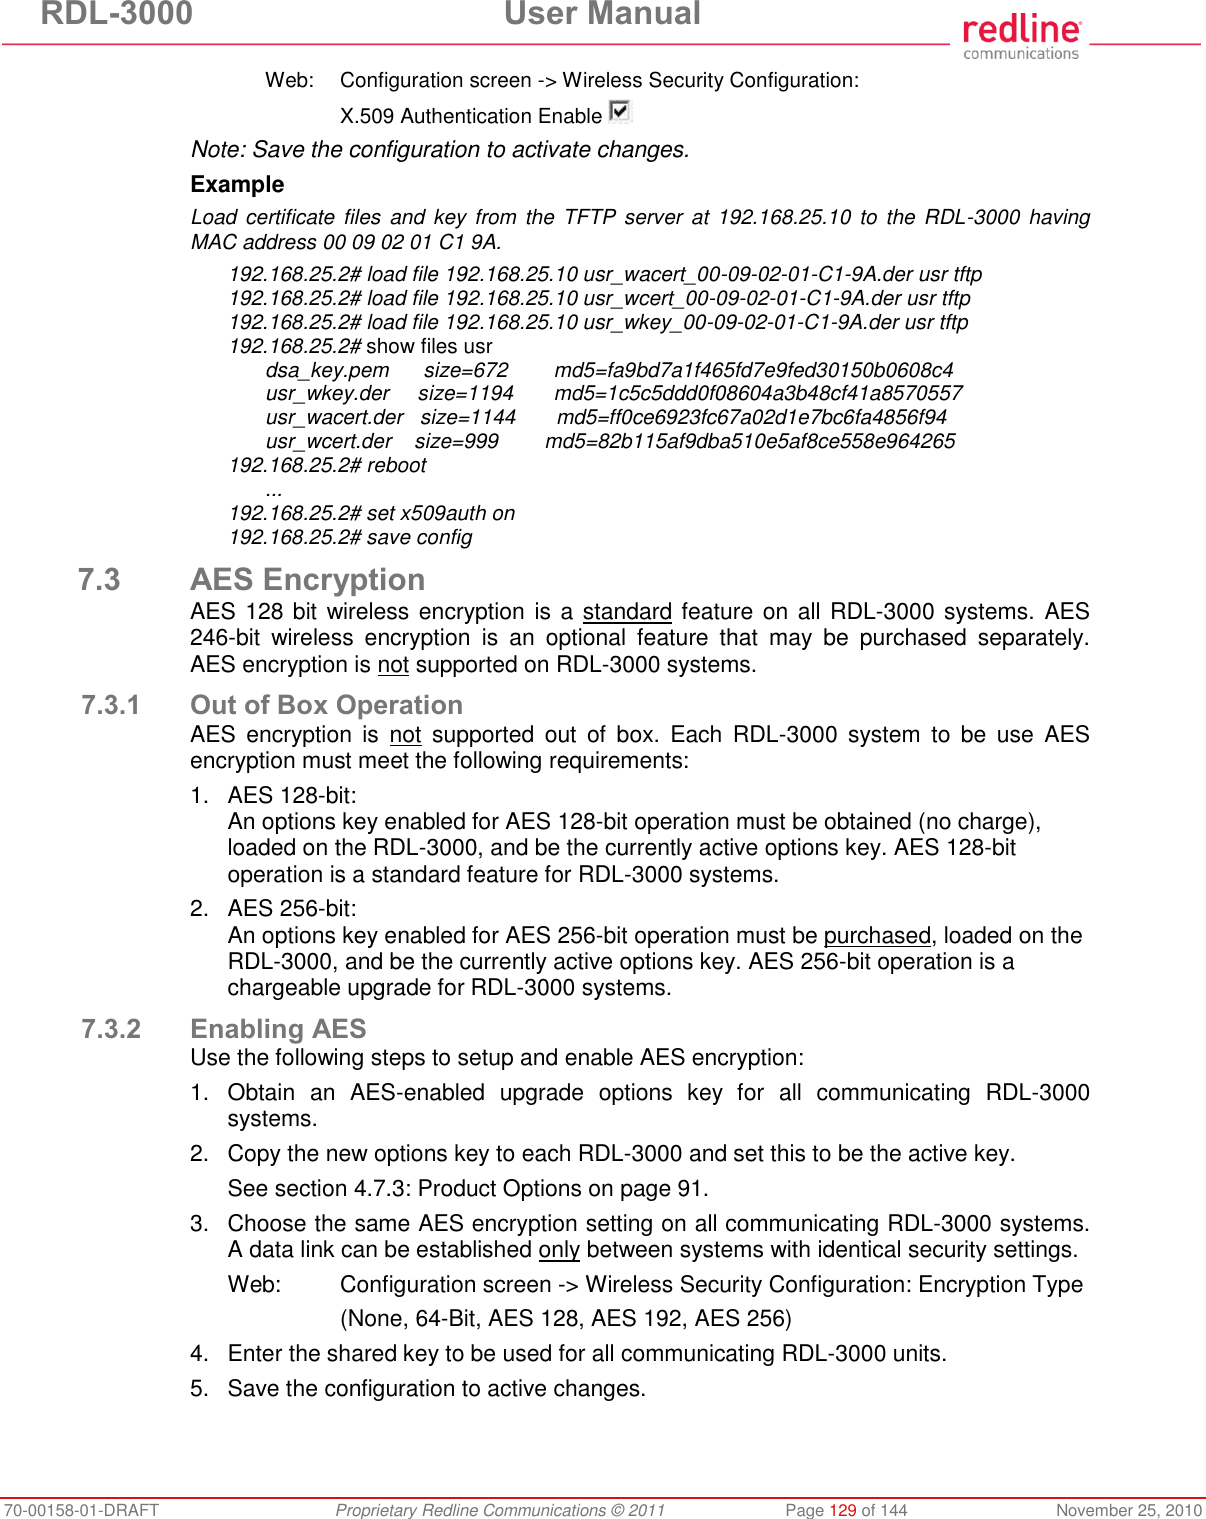 RDL-3000  User Manual 70-00158-01-DRAFT  Proprietary Redline Communications © 2011  Page 129 of 144  November 25, 2010   Web:  Configuration screen -&gt; Wireless Security Configuration:     X.509 Authentication Enable  Note: Save the configuration to activate changes. Example Load  certificate  files  and  key  from  the  TFTP  server  at 192.168.25.10  to  the  RDL-3000  having MAC address 00 09 02 01 C1 9A. 192.168.25.2# load file 192.168.25.10 usr_wacert_00-09-02-01-C1-9A.der usr tftp 192.168.25.2# load file 192.168.25.10 usr_wcert_00-09-02-01-C1-9A.der usr tftp 192.168.25.2# load file 192.168.25.10 usr_wkey_00-09-02-01-C1-9A.der usr tftp 192.168.25.2# show files usr   dsa_key.pem      size=672        md5=fa9bd7a1f465fd7e9fed30150b0608c4   usr_wkey.der     size=1194       md5=1c5c5ddd0f08604a3b48cf41a8570557   usr_wacert.der   size=1144       md5=ff0ce6923fc67a02d1e7bc6fa4856f94   usr_wcert.der    size=999        md5=82b115af9dba510e5af8ce558e964265 192.168.25.2# reboot  ... 192.168.25.2# set x509auth on 192.168.25.2# save config 7.3 AES Encryption AES 128 bit  wireless encryption is a standard feature on all RDL-3000 systems. AES 246-bit  wireless  encryption  is  an  optional  feature  that  may  be  purchased  separately. AES encryption is not supported on RDL-3000 systems. 7.3.1 Out of Box Operation AES  encryption  is  not  supported  out  of  box.  Each  RDL-3000  system  to  be  use  AES encryption must meet the following requirements: 1.  AES 128-bit: An options key enabled for AES 128-bit operation must be obtained (no charge), loaded on the RDL-3000, and be the currently active options key. AES 128-bit operation is a standard feature for RDL-3000 systems. 2.  AES 256-bit: An options key enabled for AES 256-bit operation must be purchased, loaded on the RDL-3000, and be the currently active options key. AES 256-bit operation is a chargeable upgrade for RDL-3000 systems. 7.3.2 Enabling AES Use the following steps to setup and enable AES encryption: 1.  Obtain  an  AES-enabled  upgrade  options  key  for  all  communicating  RDL-3000 systems. 2.  Copy the new options key to each RDL-3000 and set this to be the active key. See section 4.7.3: Product Options on page 91. 3.  Choose the same AES encryption setting on all communicating RDL-3000 systems. A data link can be established only between systems with identical security settings. Web:  Configuration screen -&gt; Wireless Security Configuration: Encryption Type     (None, 64-Bit, AES 128, AES 192, AES 256) 4.  Enter the shared key to be used for all communicating RDL-3000 units. 5.  Save the configuration to active changes. 